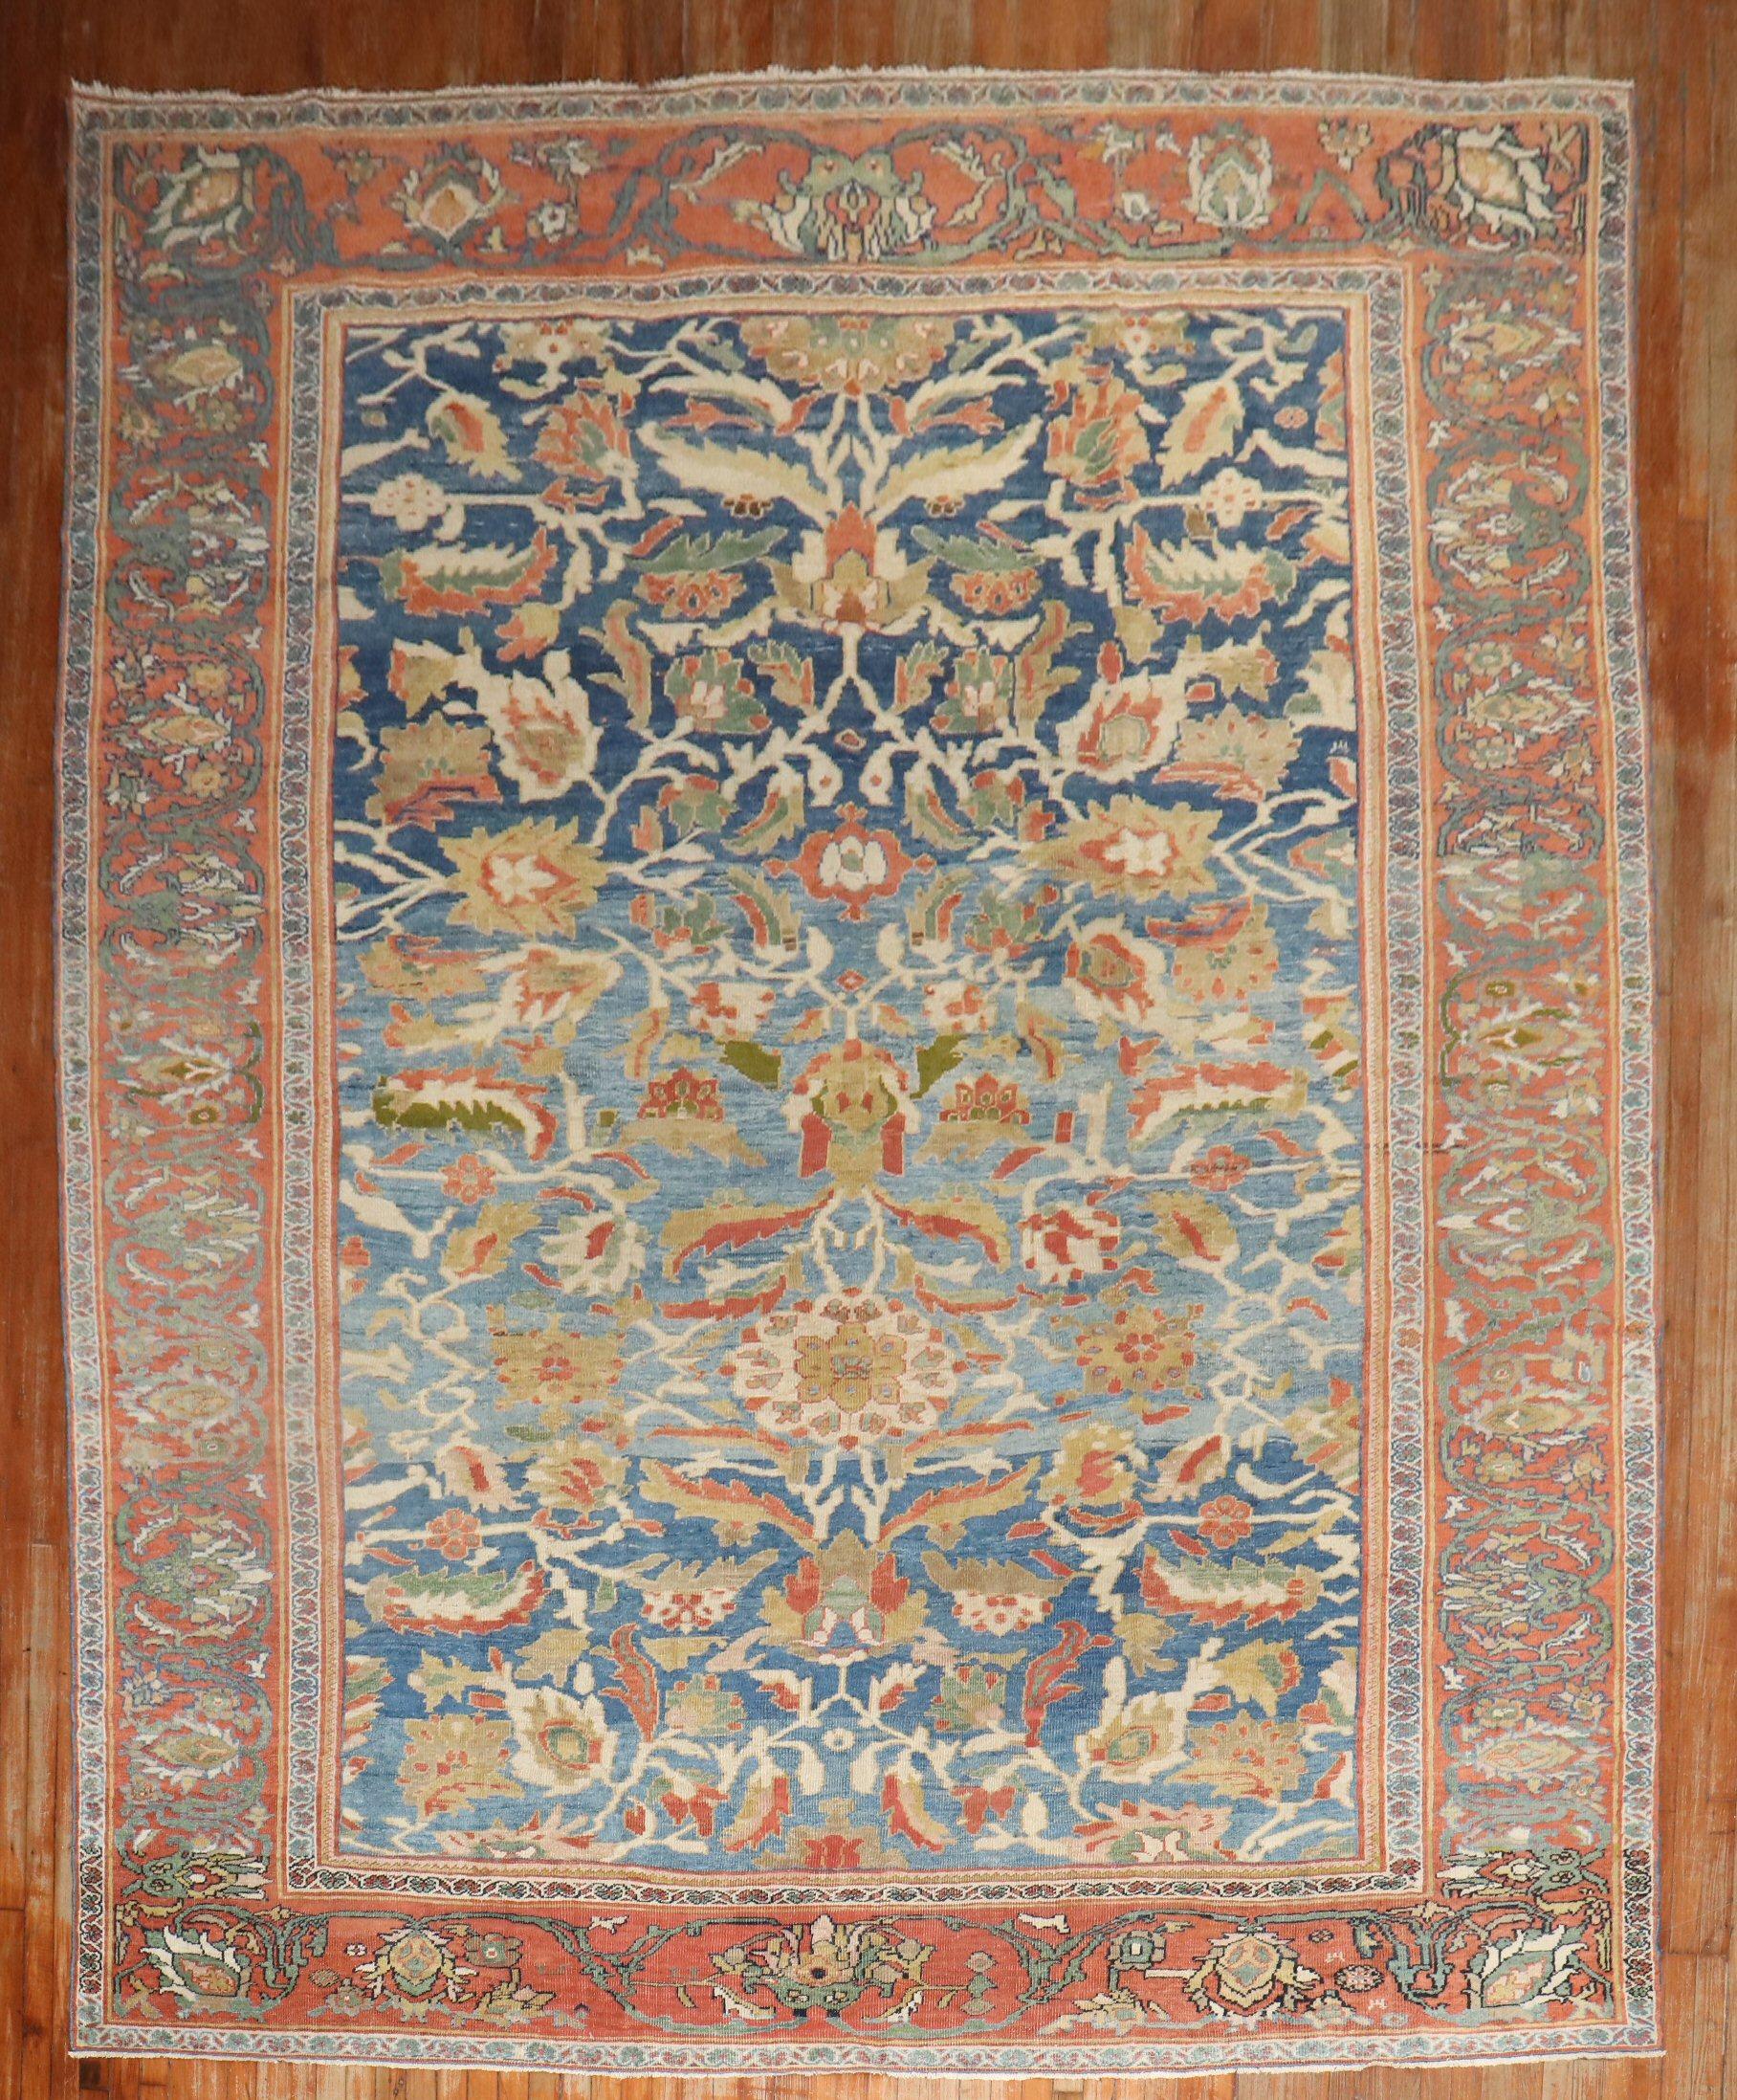 A connoisseur caliber late 19th century Sky Blue Persian Ziegler Mahal Sultanabad carpet.

Measures: 9'11'' x 13'9''

Woven in a series of villages in Western Central Iran, Sultanabad carpets employ over-scale, spacious all-over patterns that